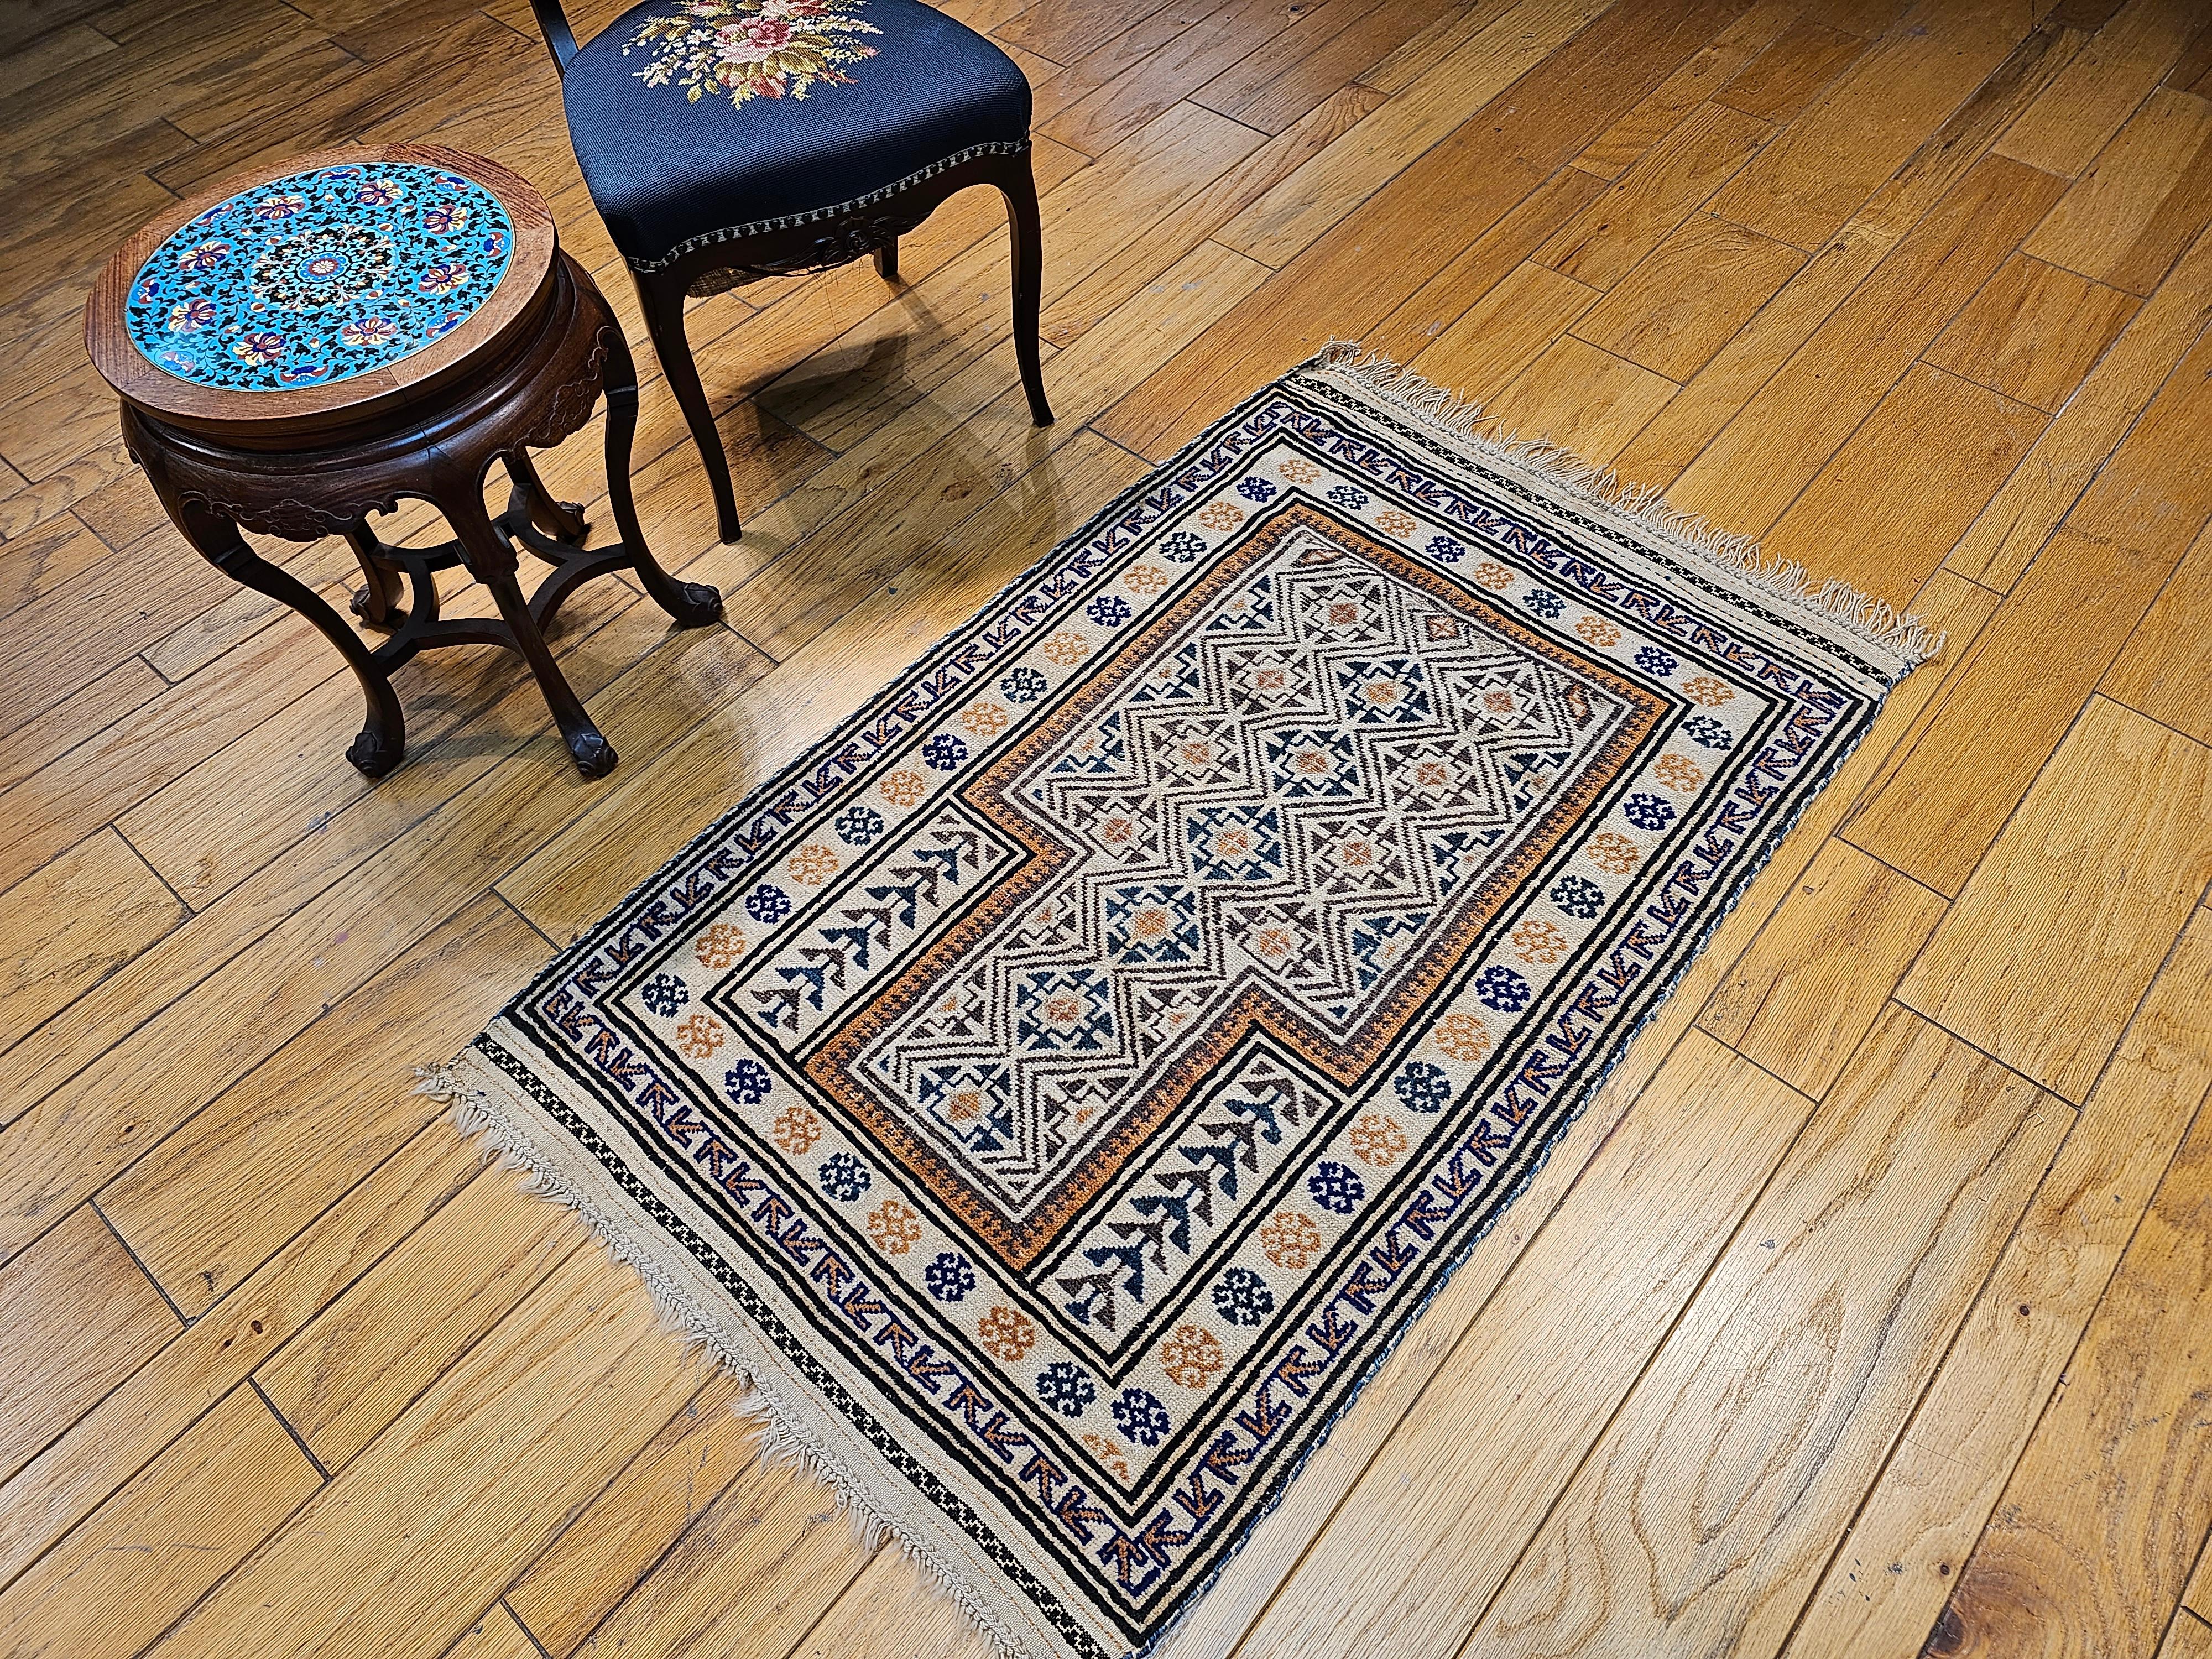 Early 20th Century Persian Baluch Prayer Rug Pattern in Ivory, Brown, Navy Blue For Sale 7